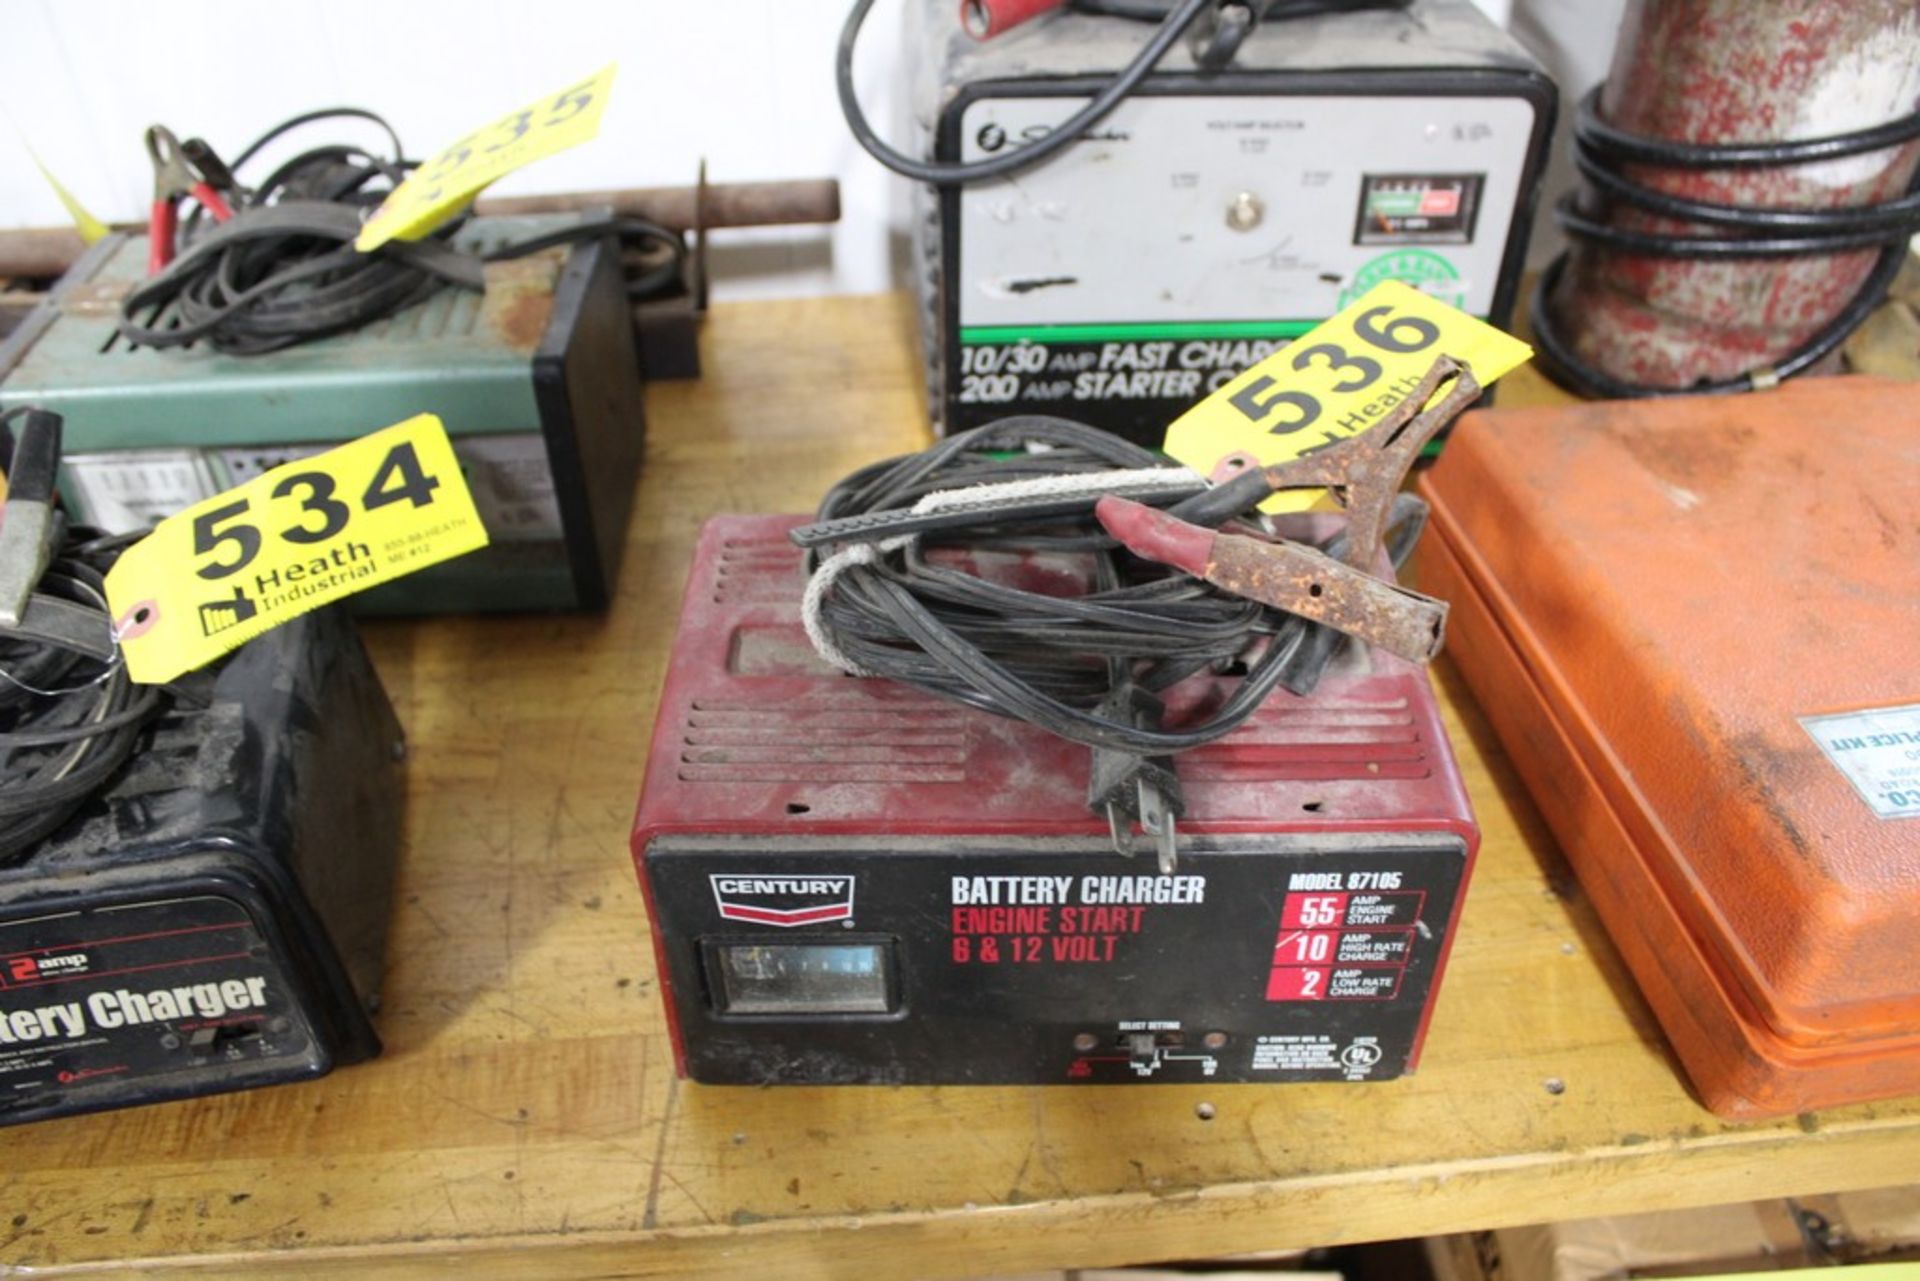 CENTRY MODEL 87105 6/12 VOLT BATTERY CHARGER WITH ENGINE START